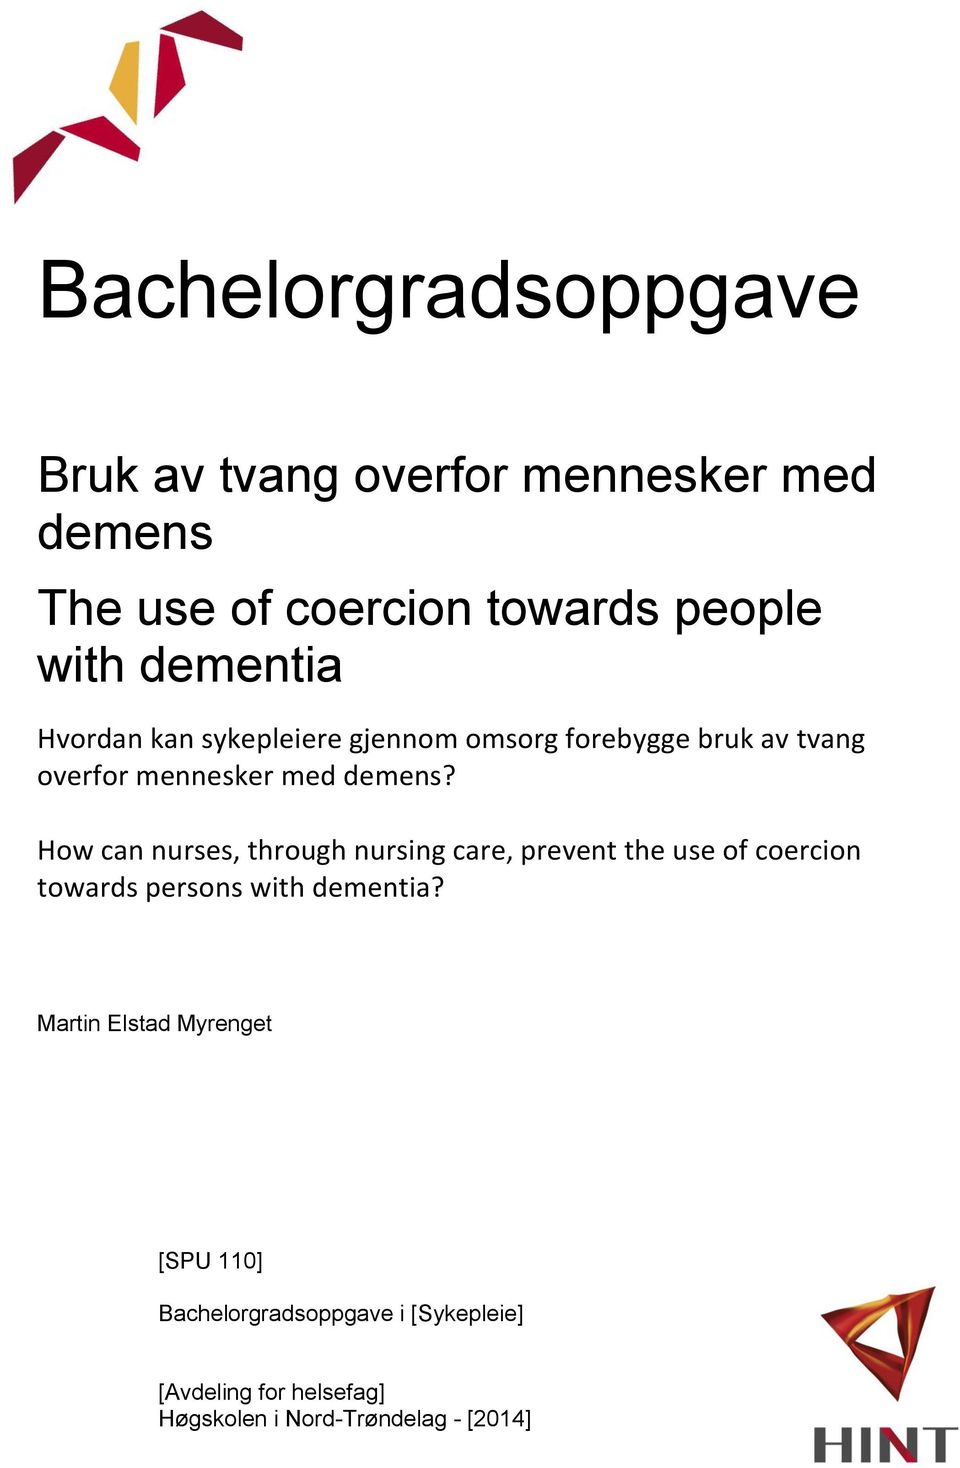 How can nurses, through nursing care, prevent the use of coercion towards persons with dementia?